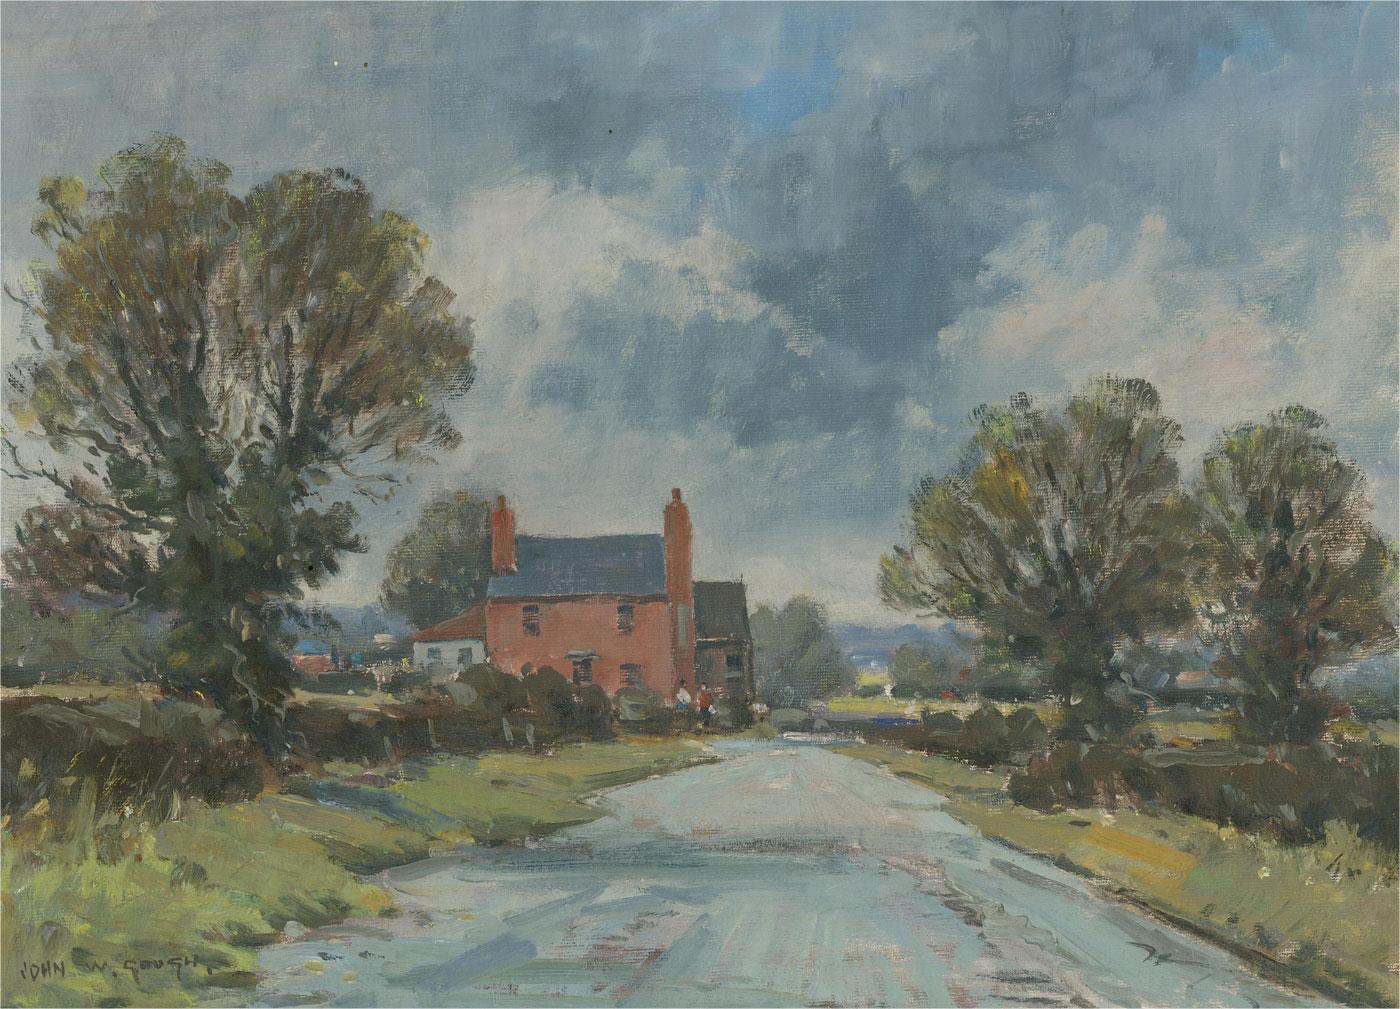 A fine oil scene showing a rural village road with two figures standing outside a house in the middle ground under heavy grey clouds. The artist has signed to the lower left corner. On canvas board.
